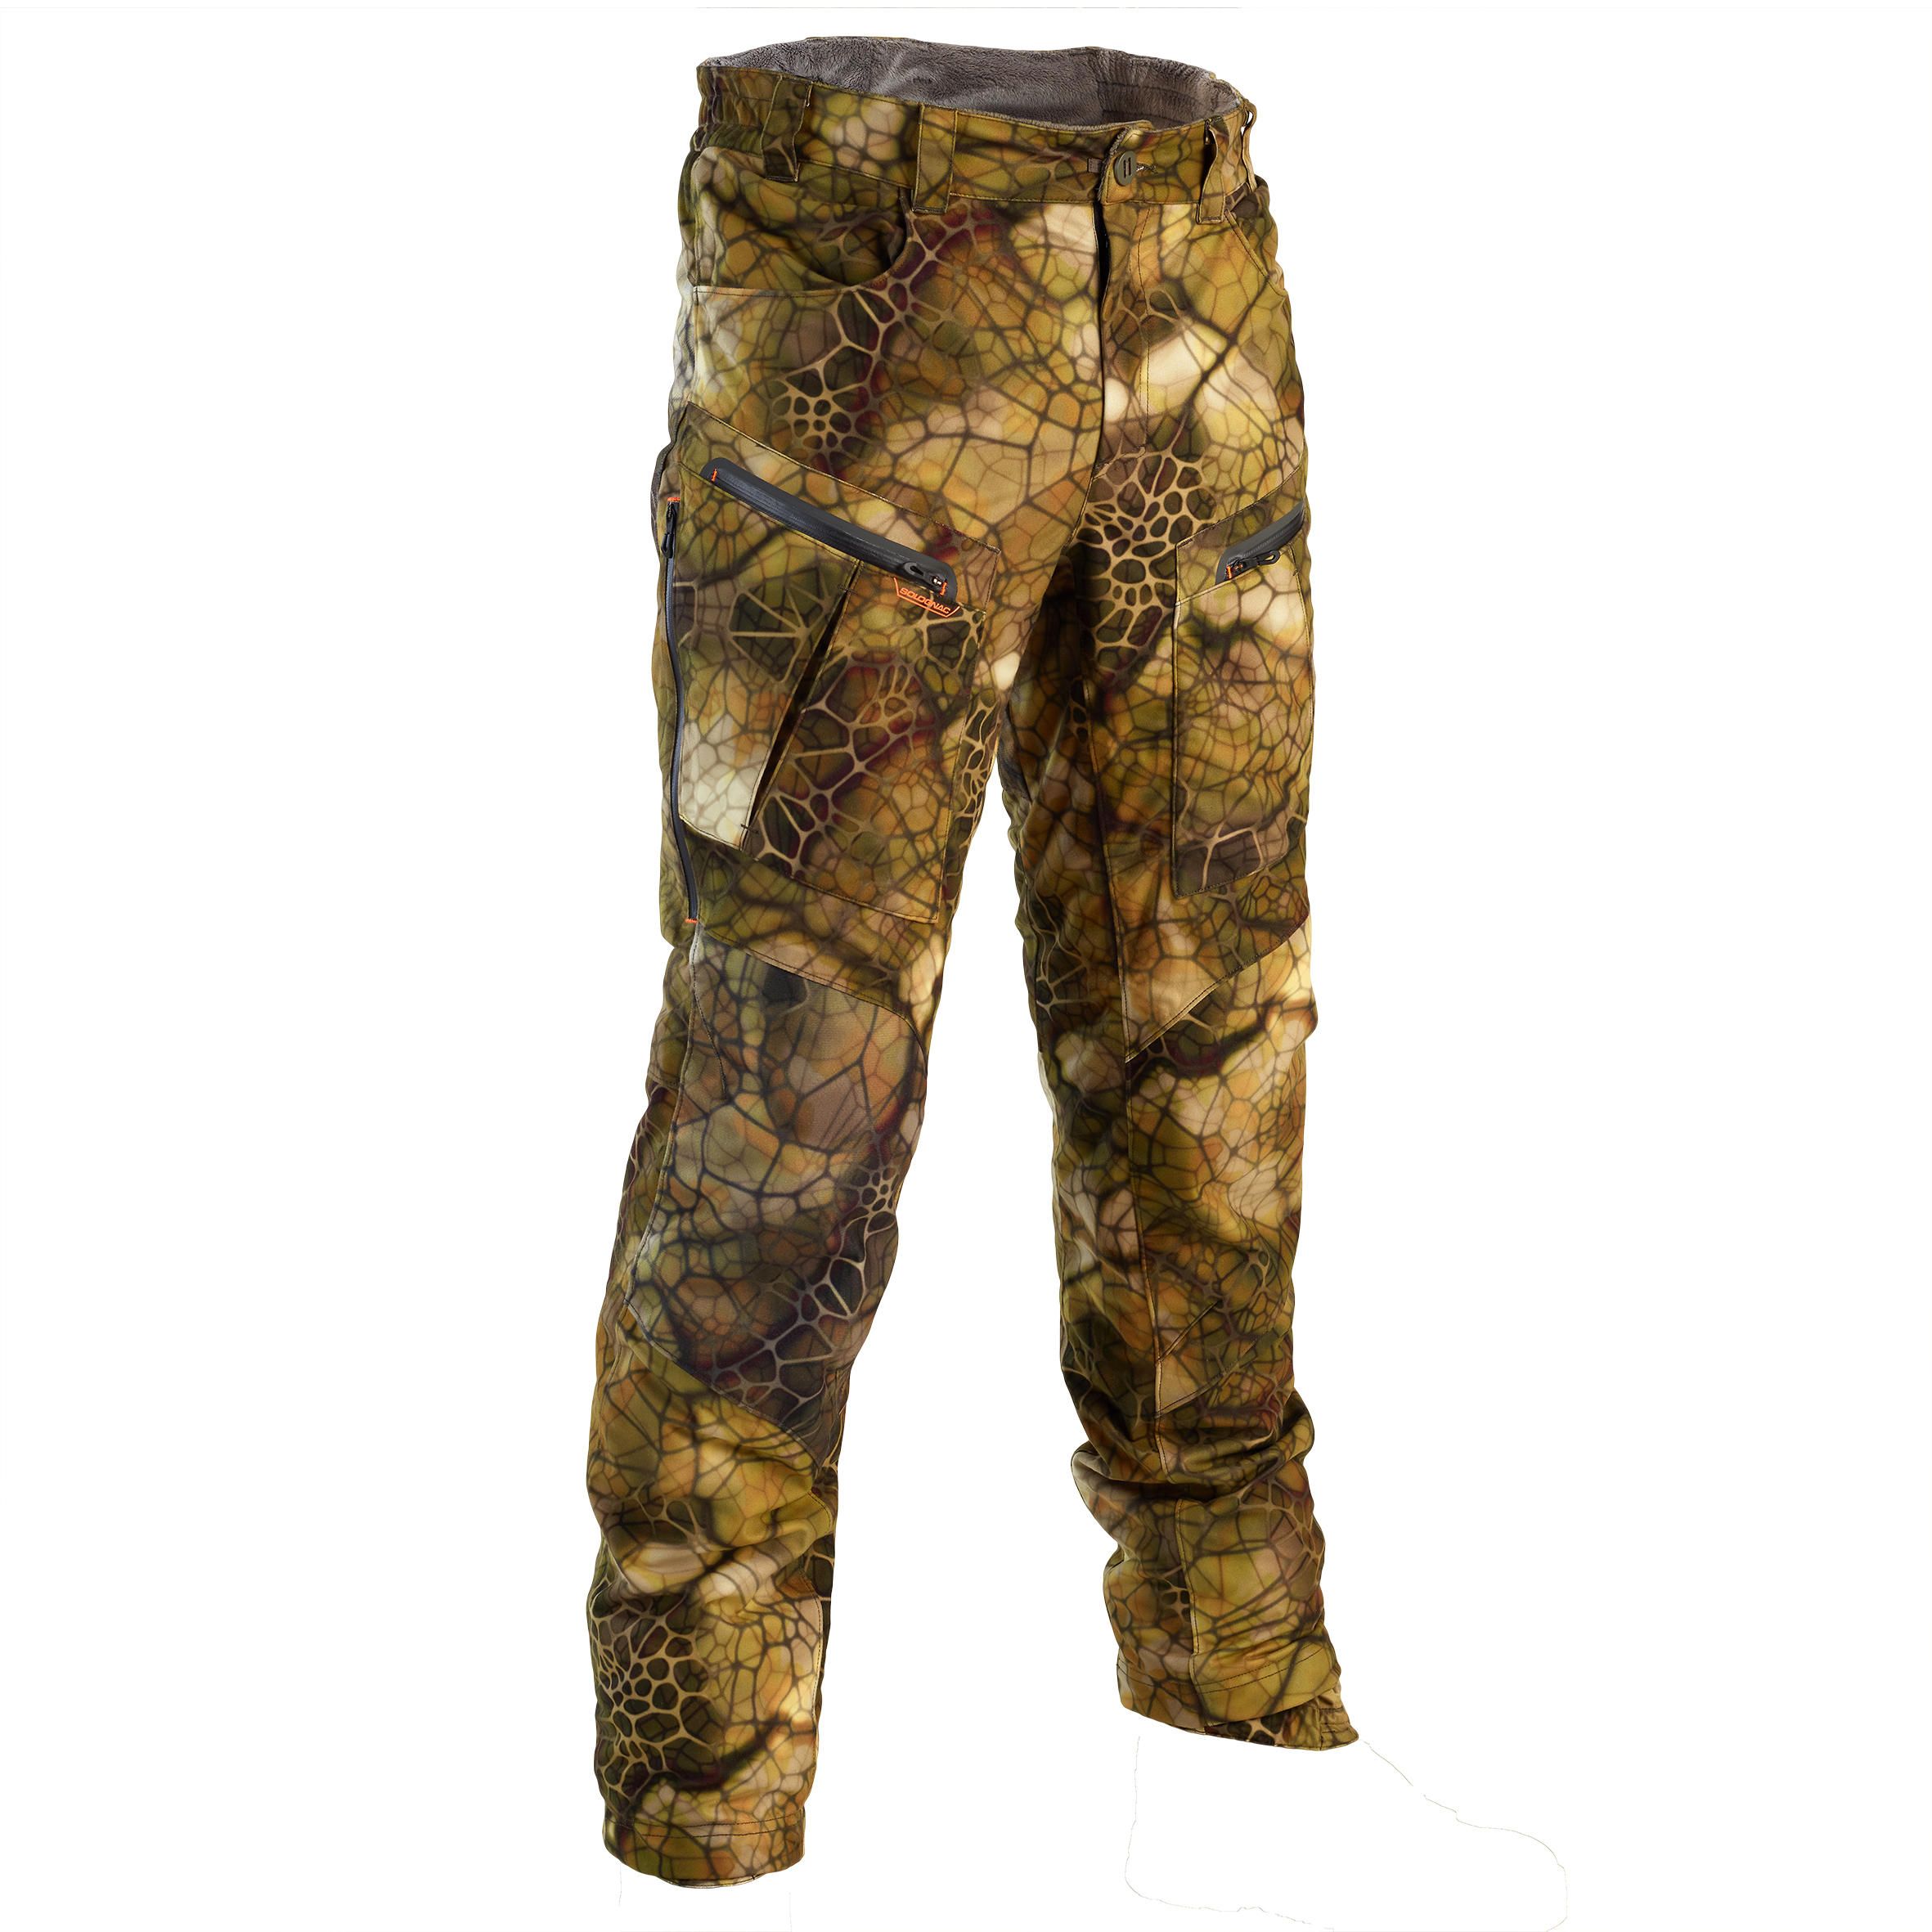 Pants For Men New Tough 6 Pockets Cargo Trousers - Stay Stylish And Ready  For Action With New Tough Cargo Pants